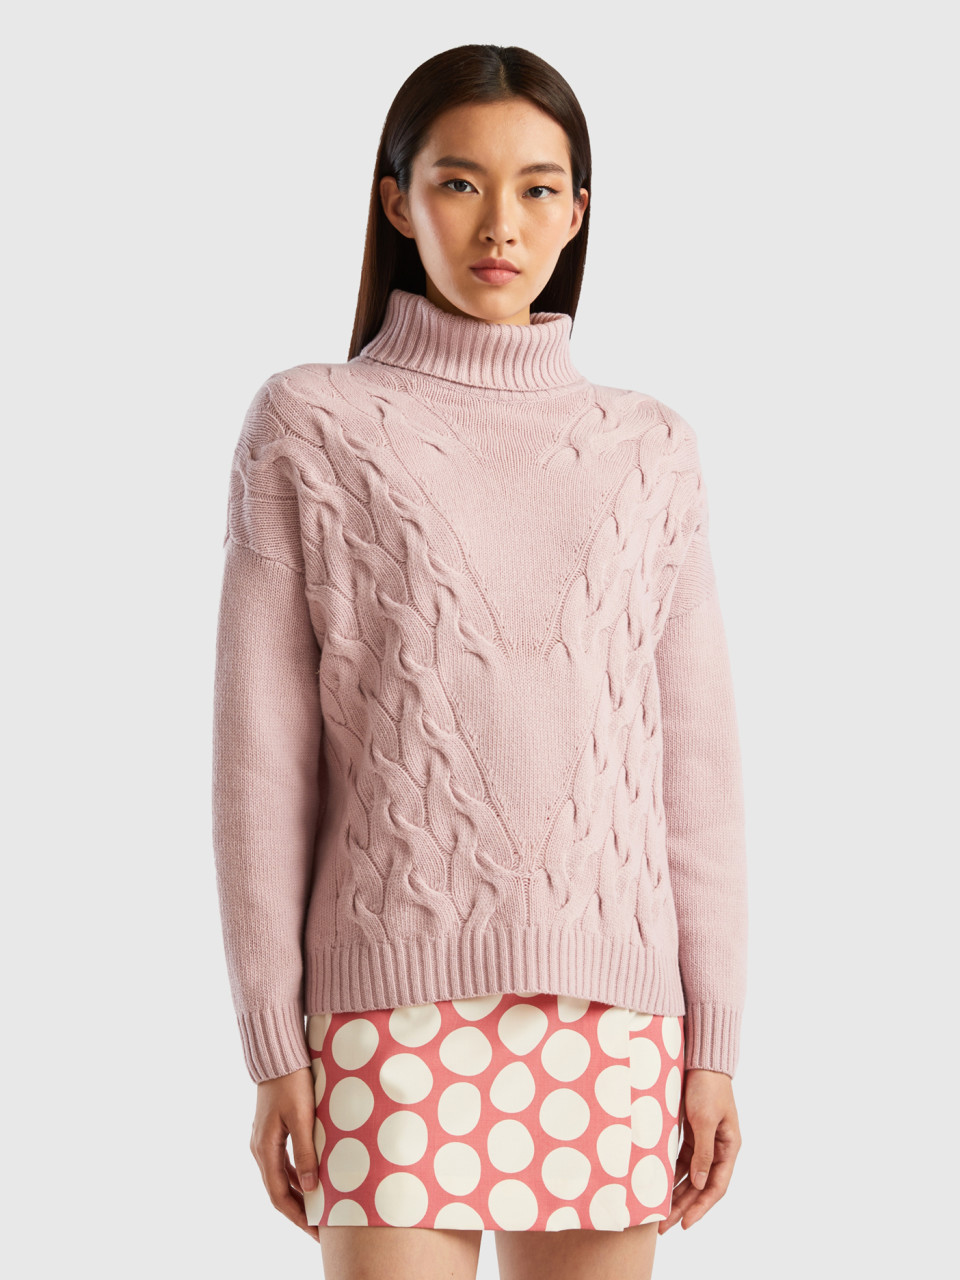 Benetton, Turtleneck With Cables, Soft Pink, Women